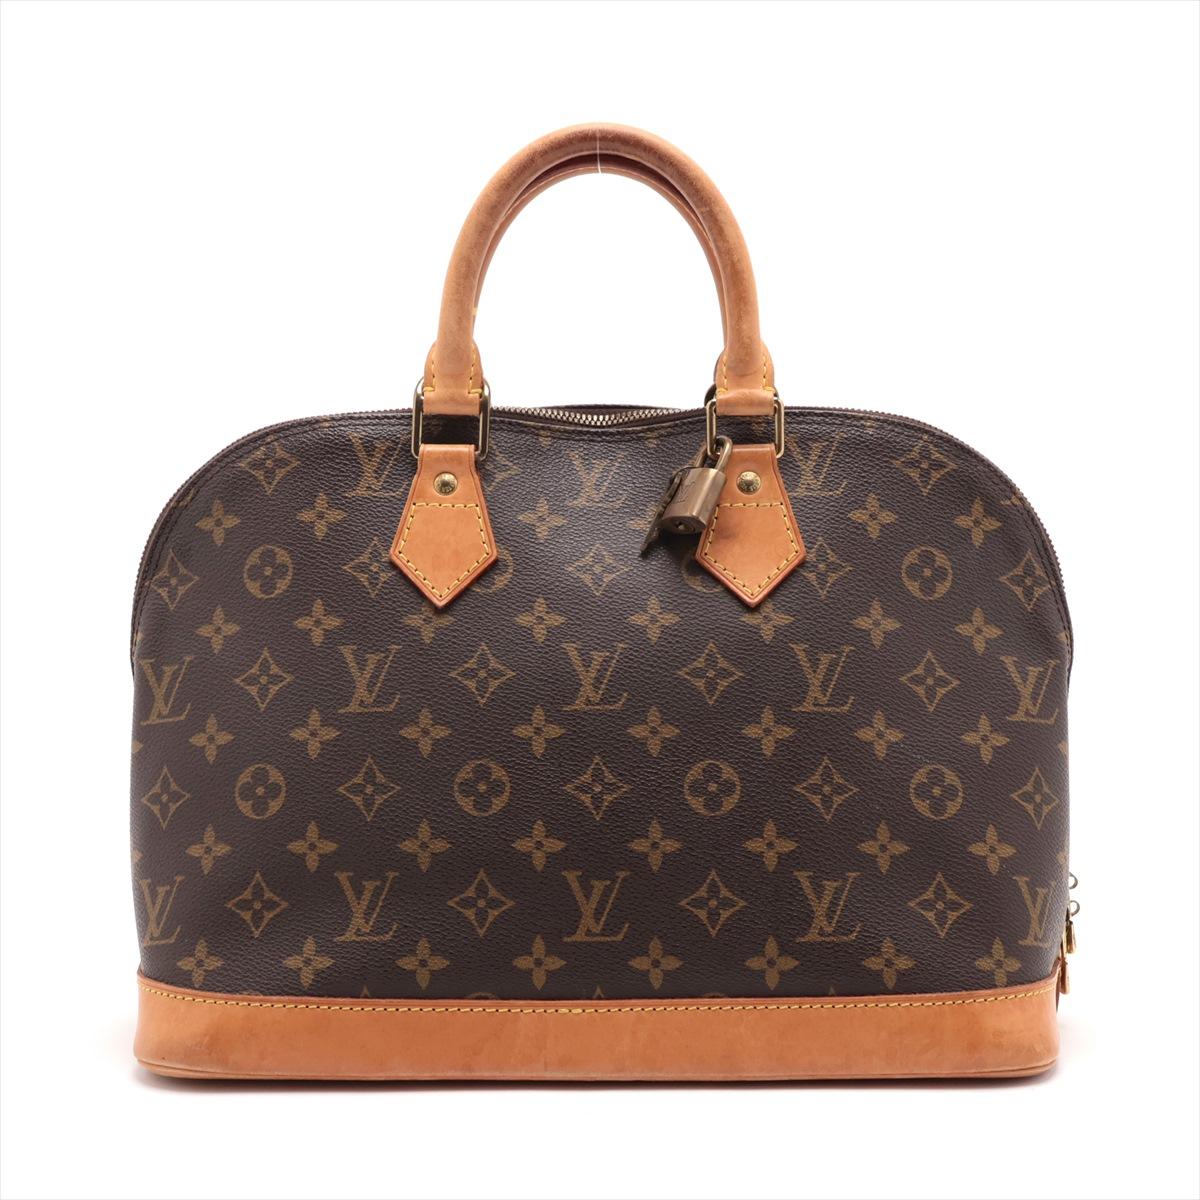 Louis Vuitton Monogram Alma In Good Condition For Sale In Indianapolis, IN